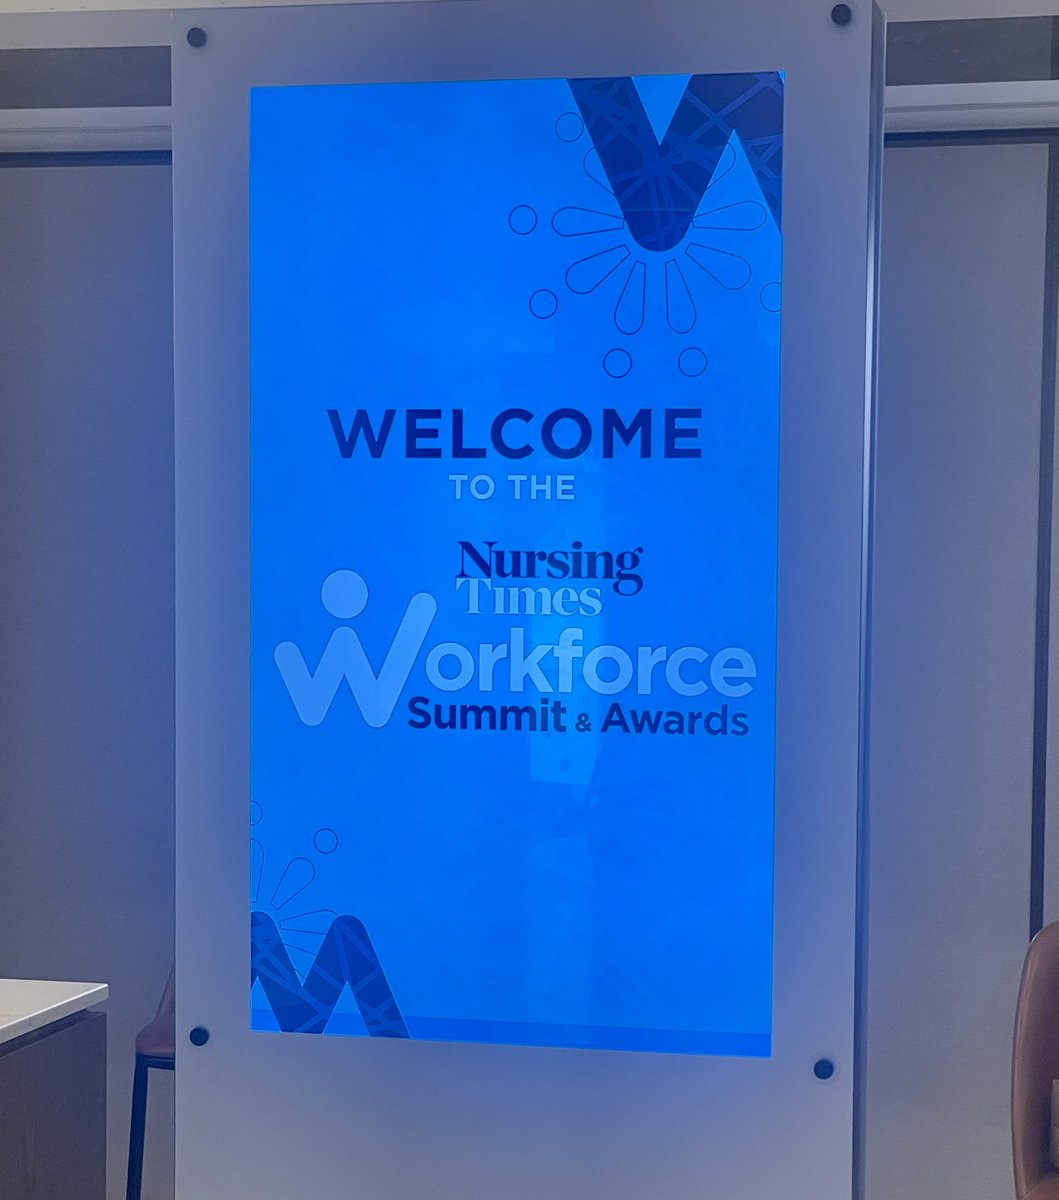 Proud to be representing Southport Critical Care unit @NursingTimes Workforce Summit & Awards 💙 #NTWorkforceawards @MWLNHS